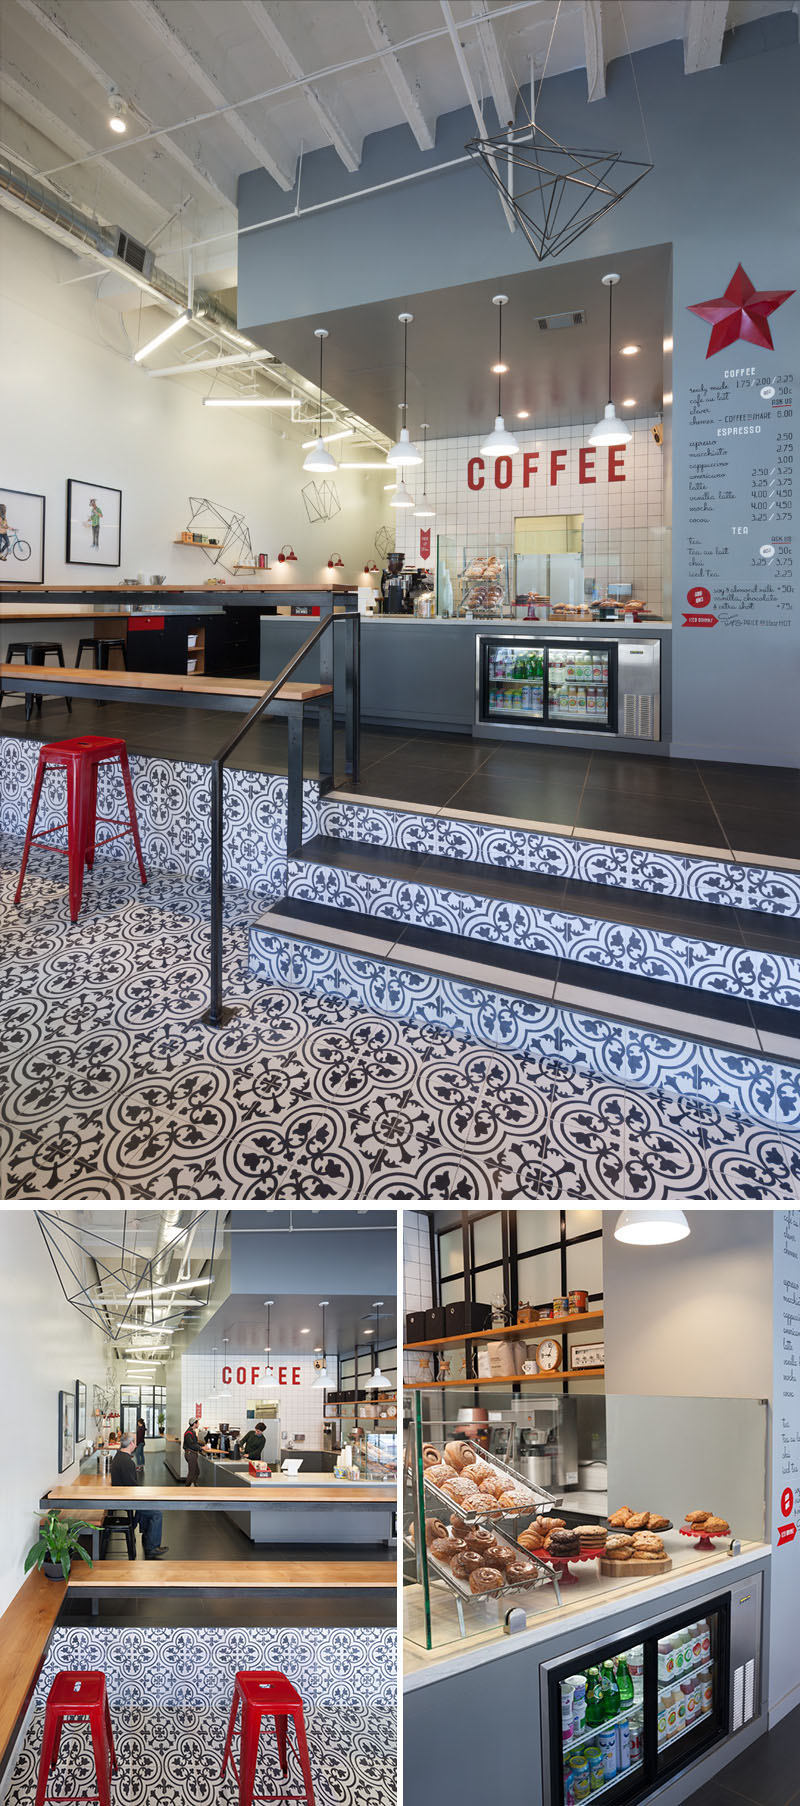 Arcsine Architecture designed Modern Coffee, a modern coffee shop in Oakland, California with a fun interior, featuring a stylish pattern floor, and a wide range of seating options to allow for casual conversation, quiet people watching, or collaborative work.